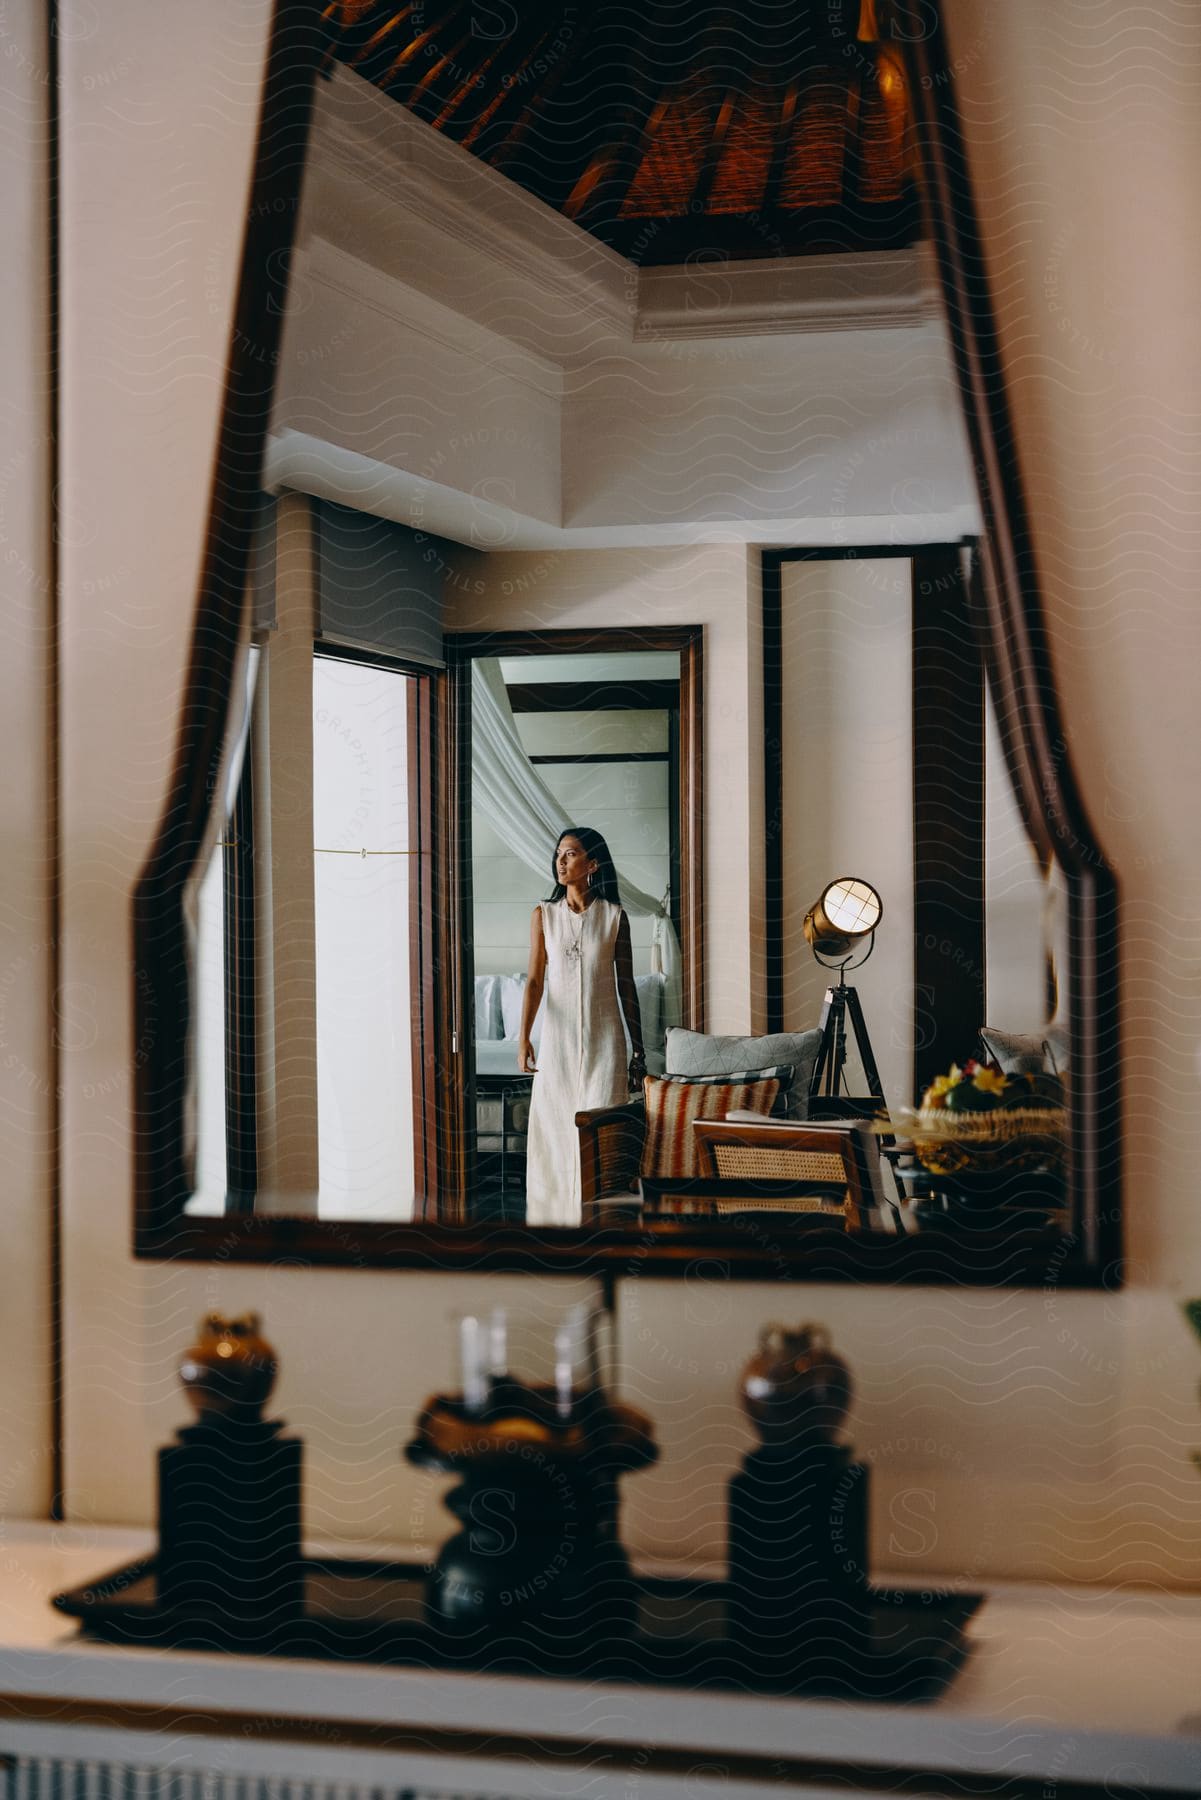 A woman wearing a white dress is seen in a mirror standing in the doorway of a room